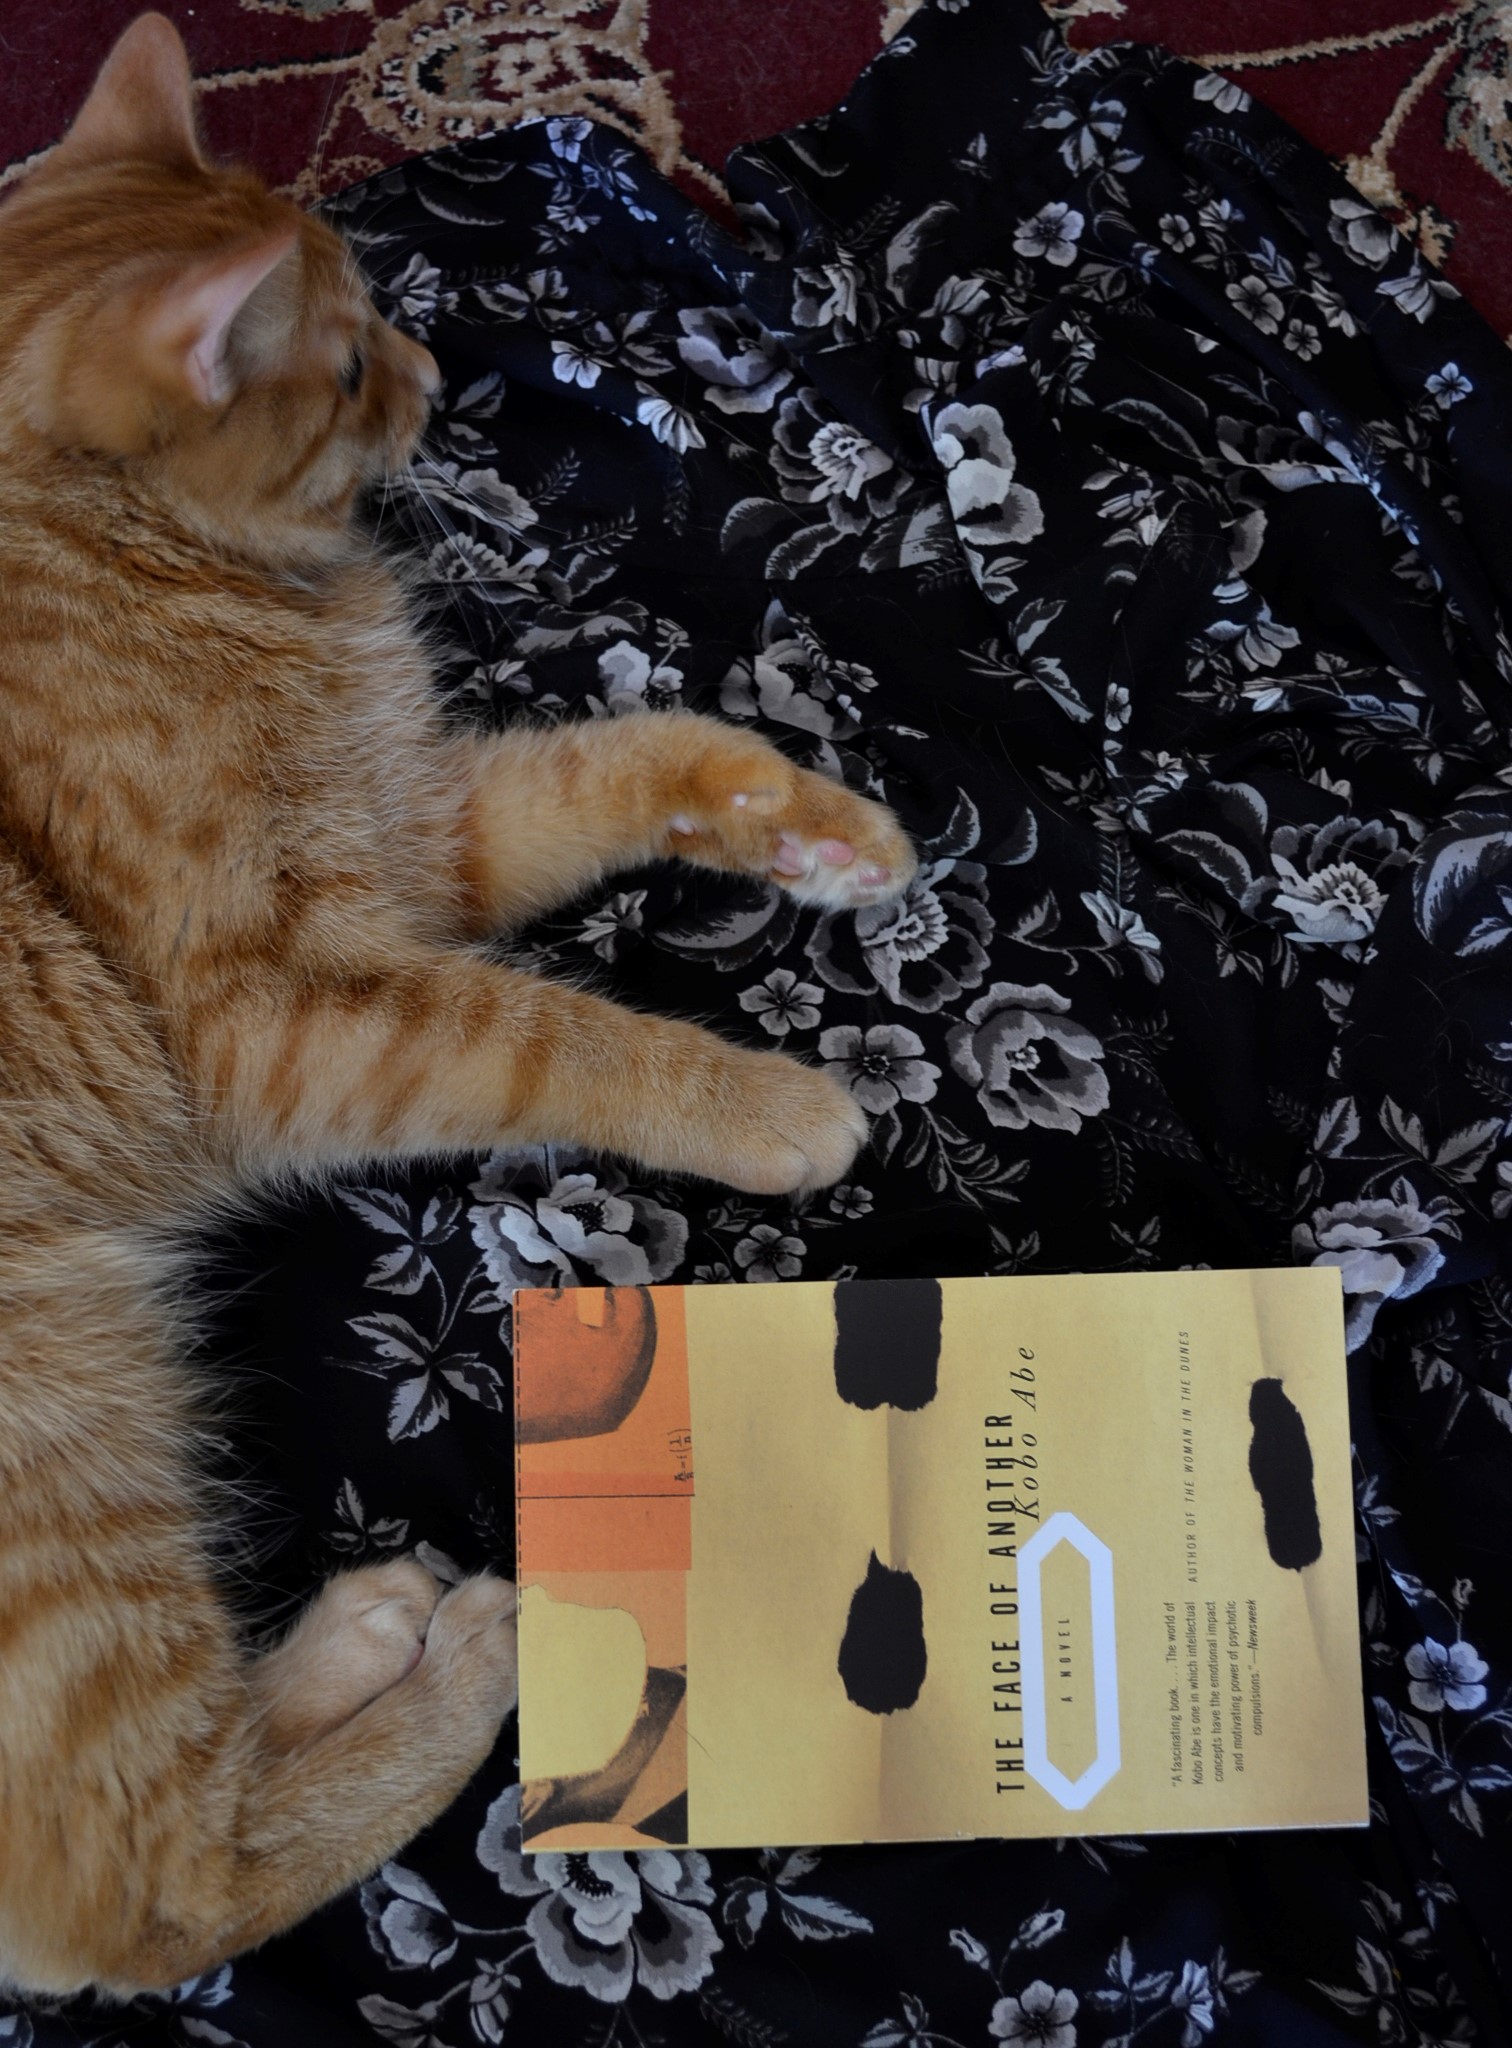 An orange tabby lounges beside the yellow cover of The Face of Another.